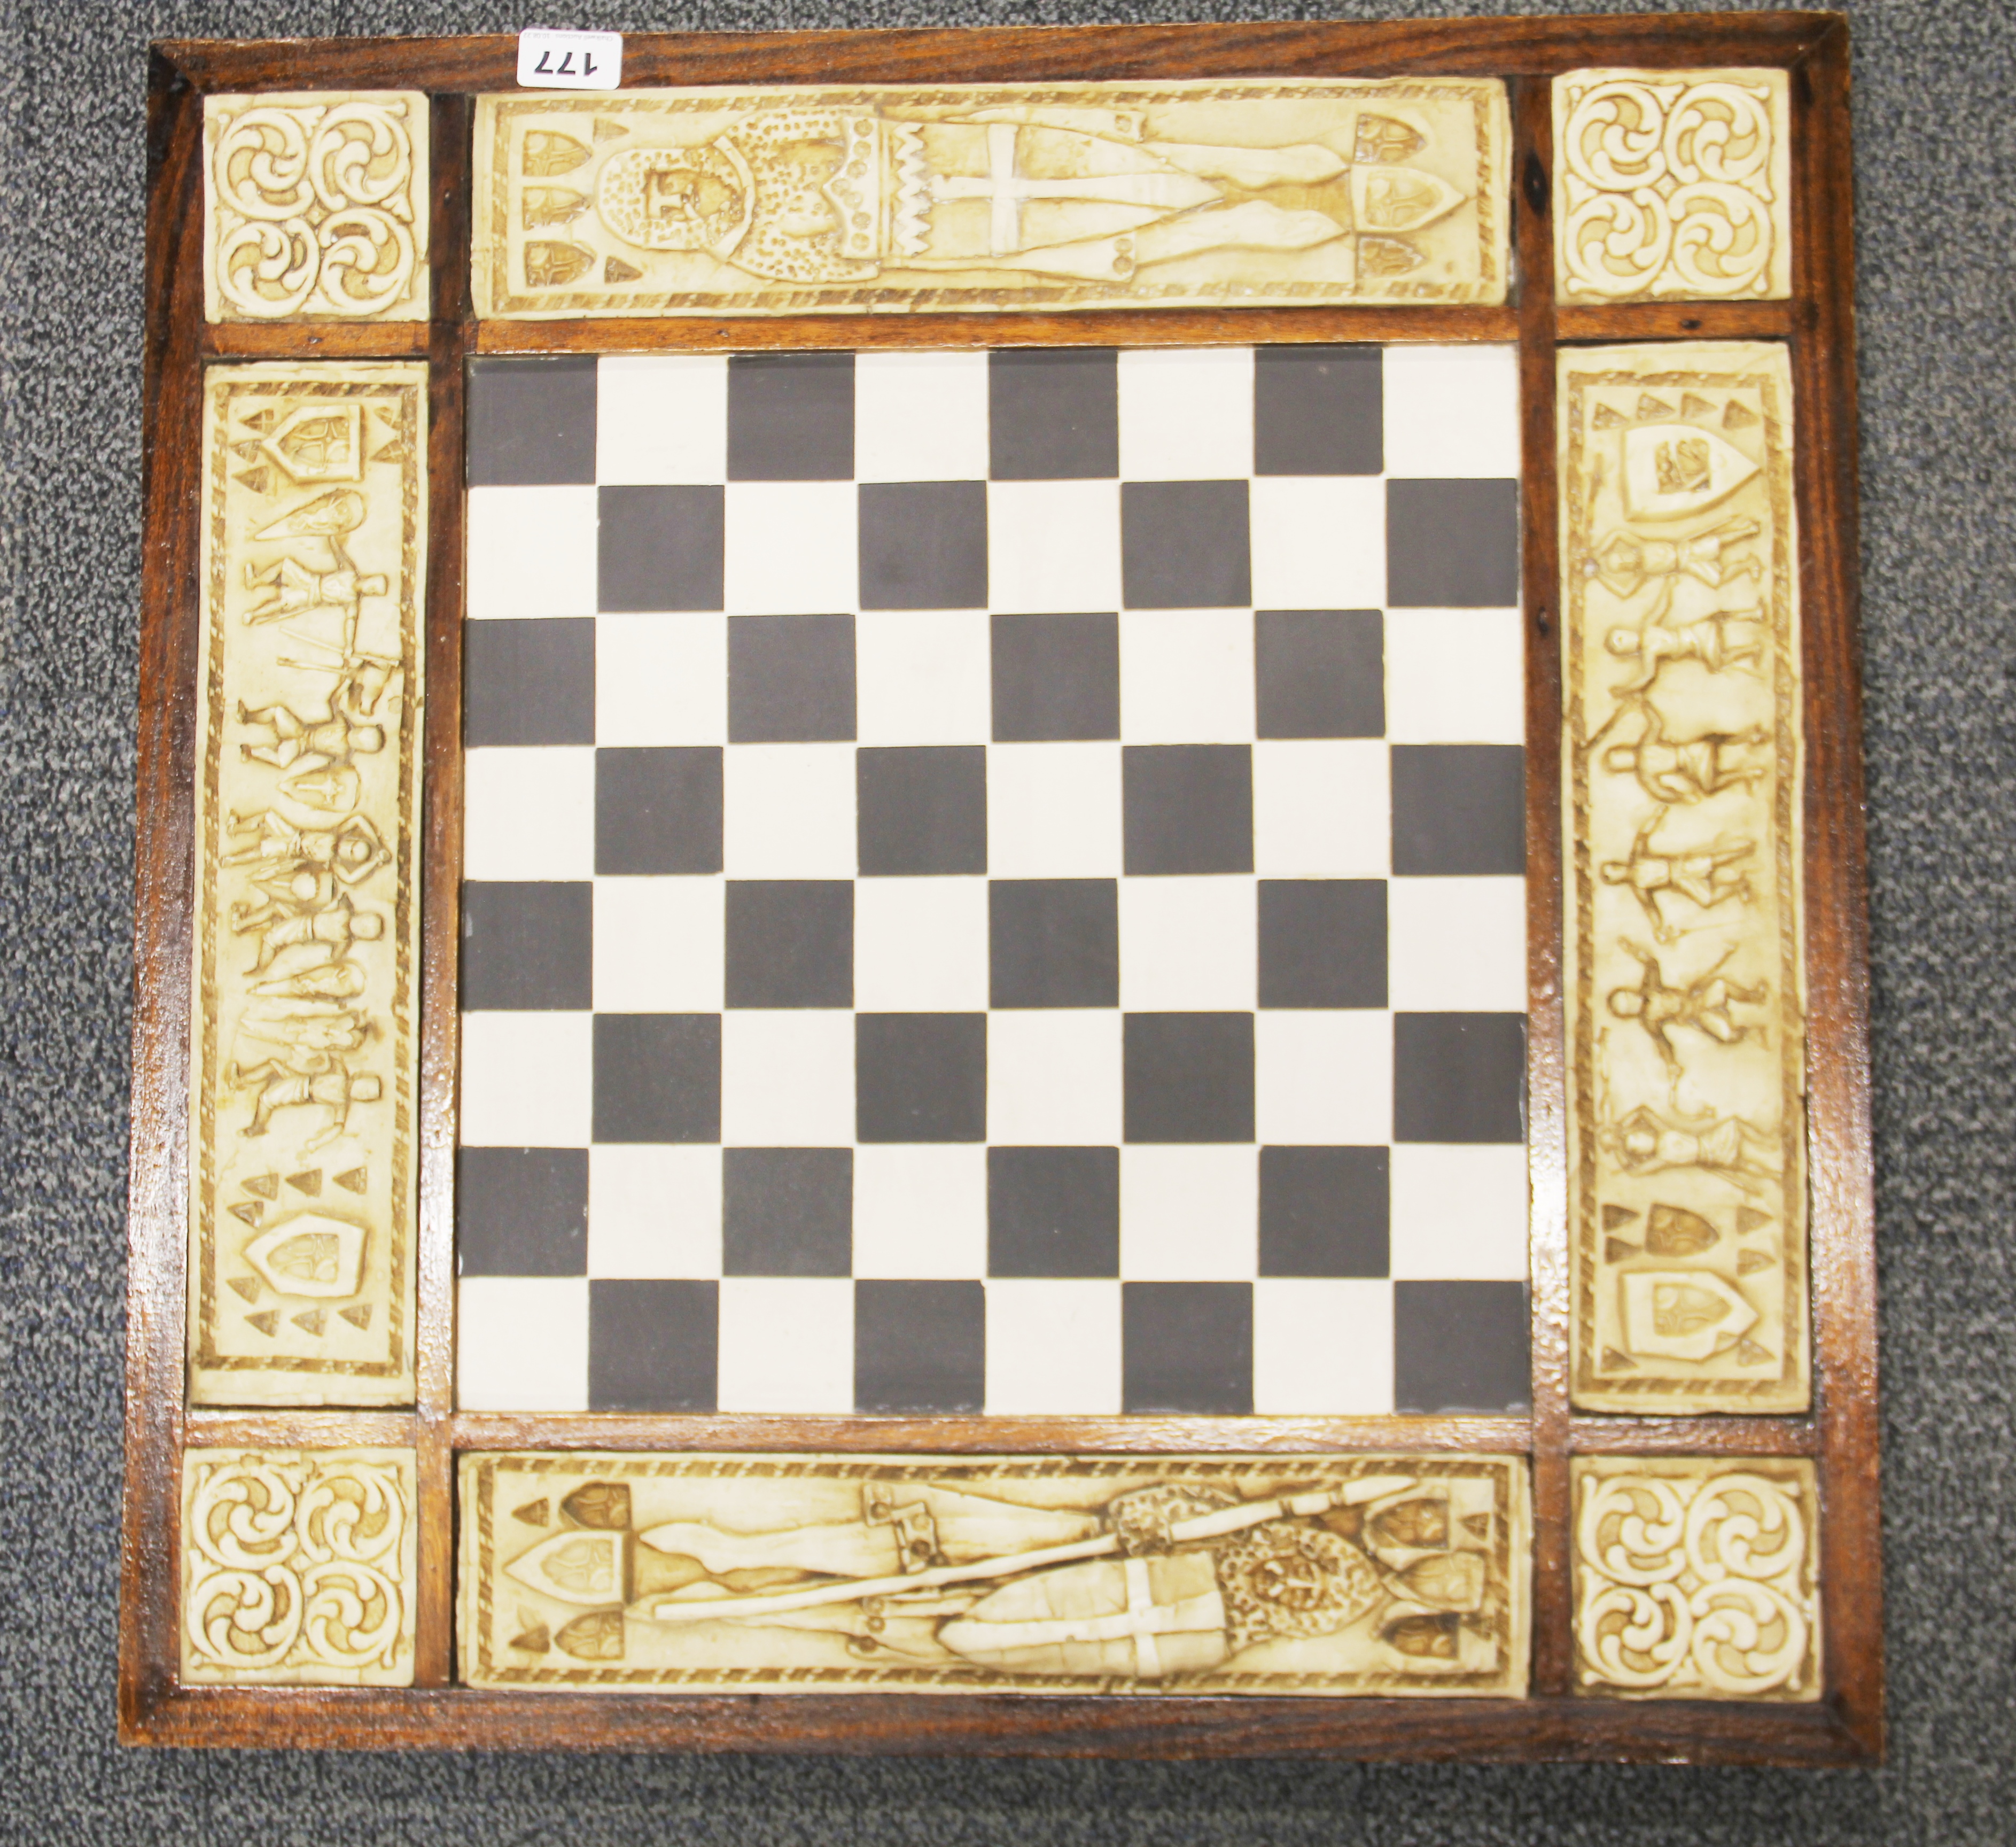 An interesting decorated Medieval style chess board, 63 x 63cm.